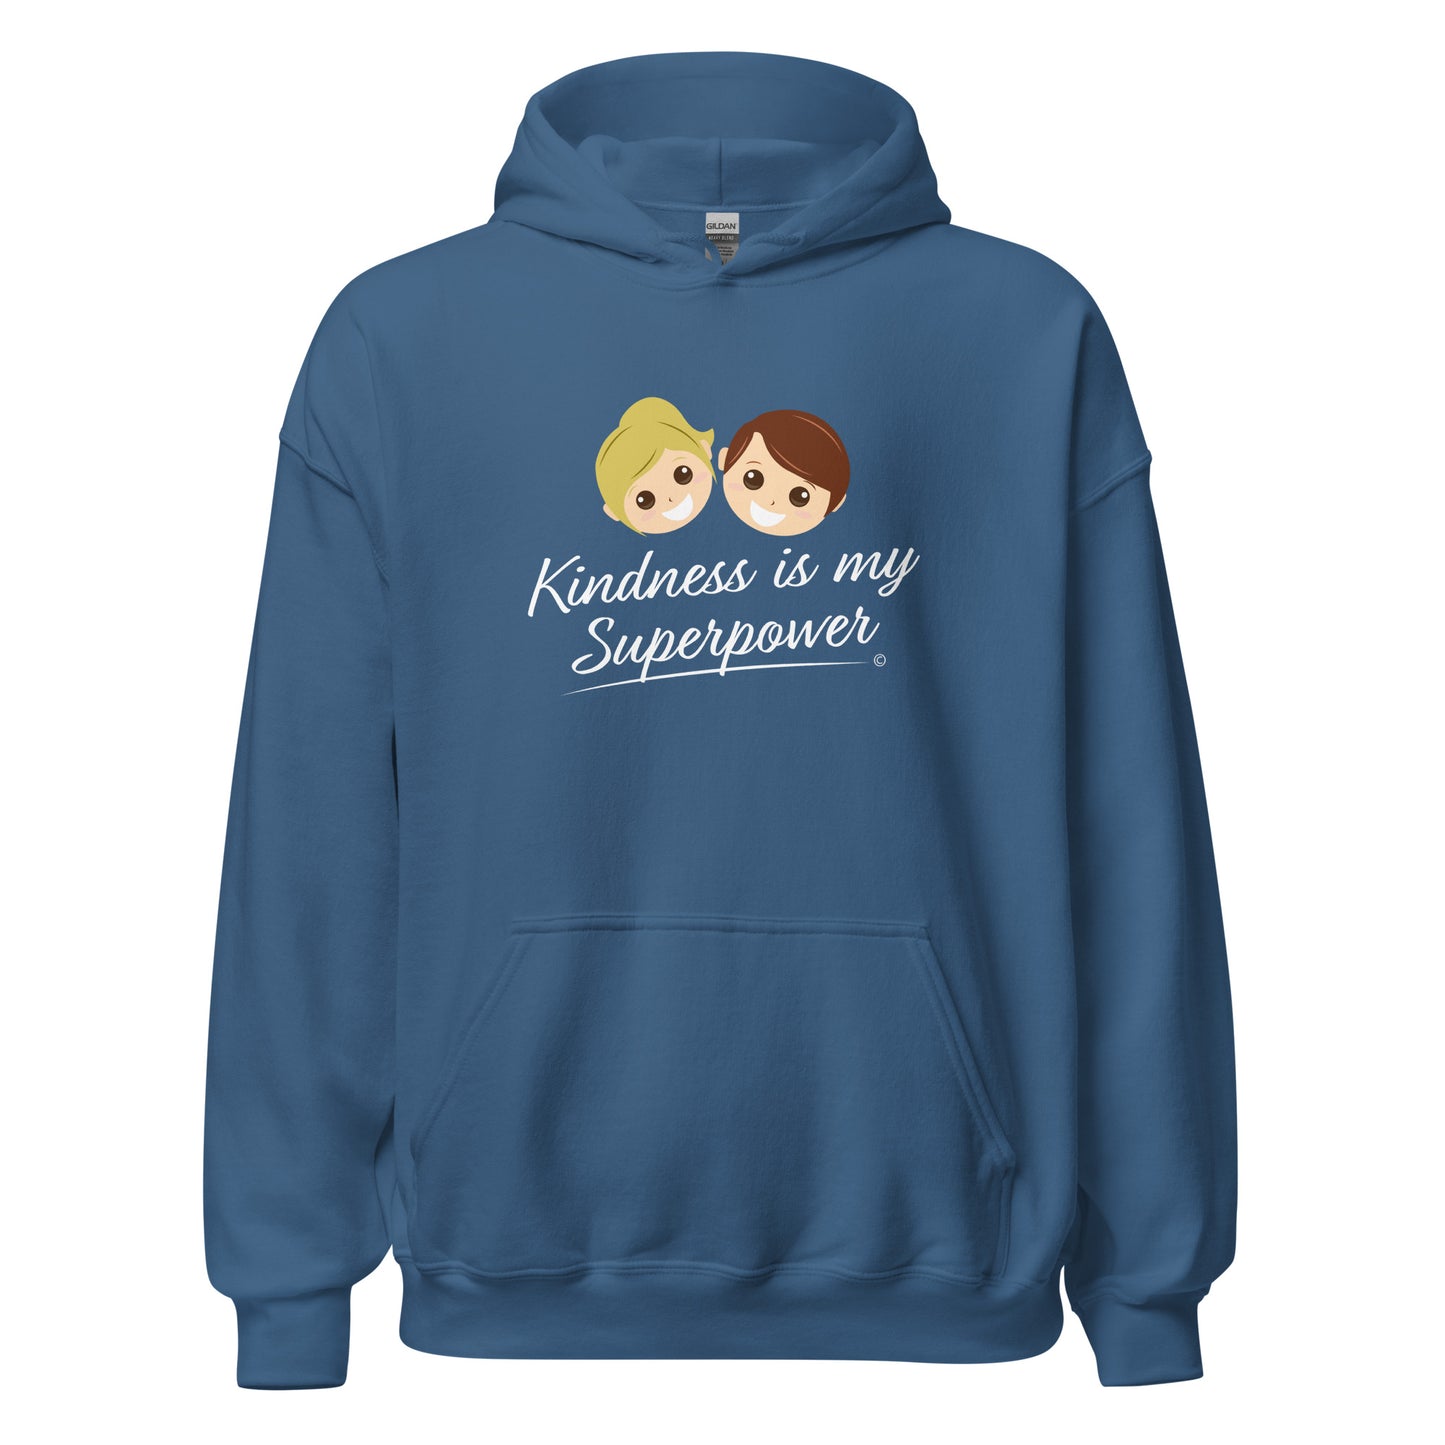 A cozy unisex hoodie in indigo blue featuring the uplifting quote 'Kindness is my Superpower' in bold lettering.